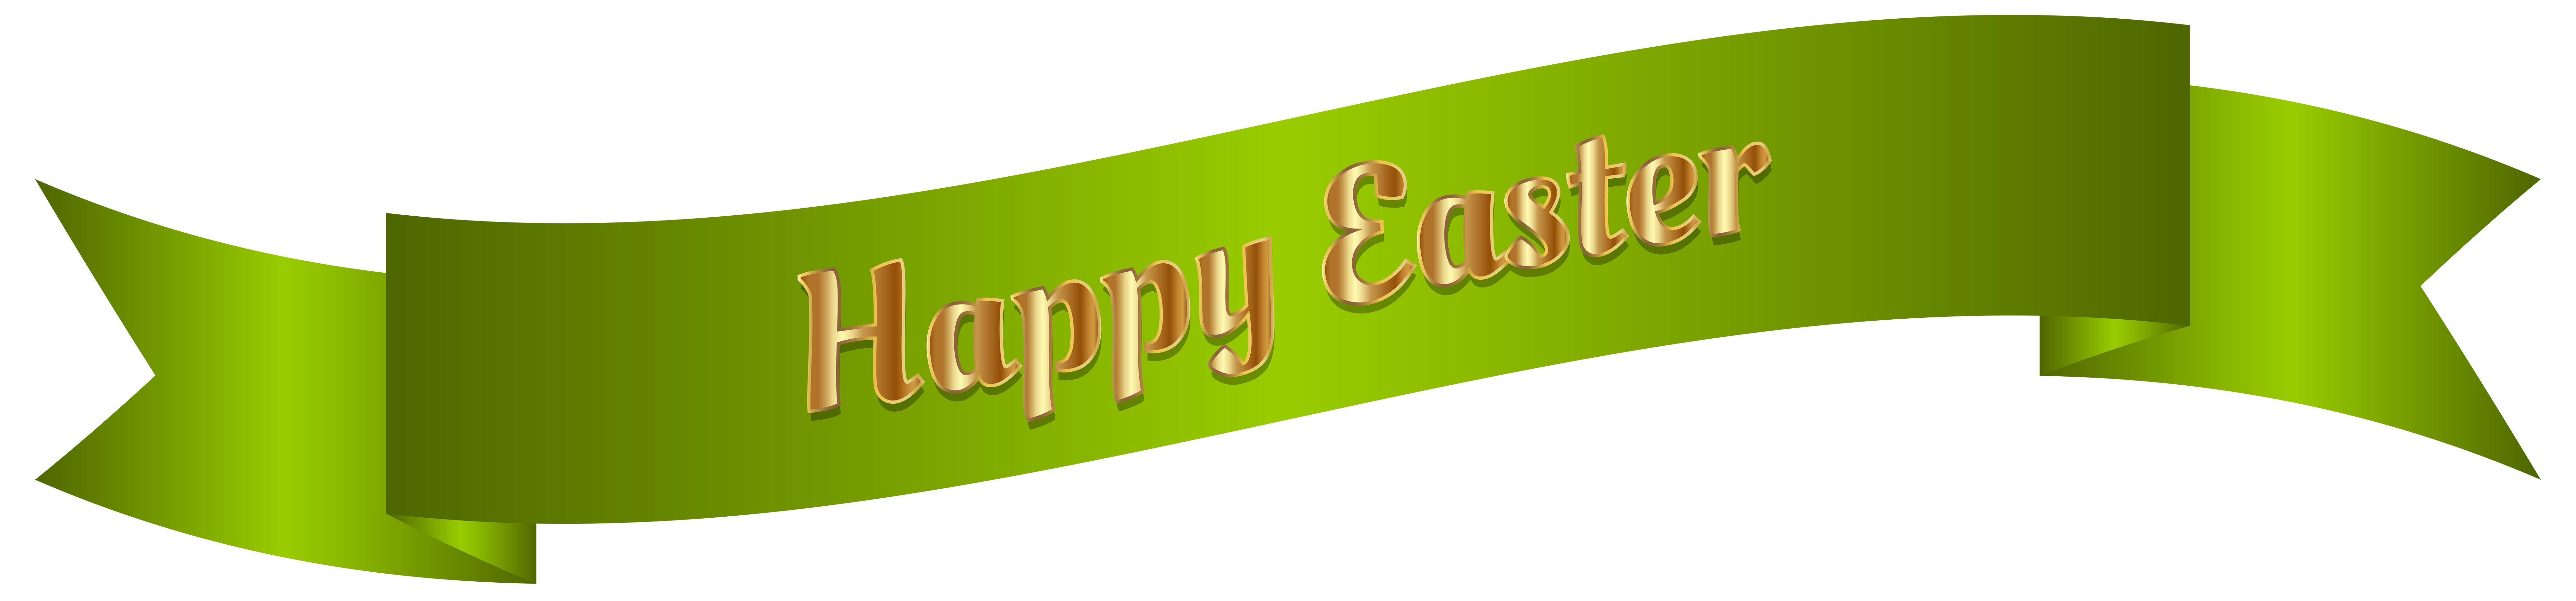 Green Happy Easter Banner PNG Clip Art Image.